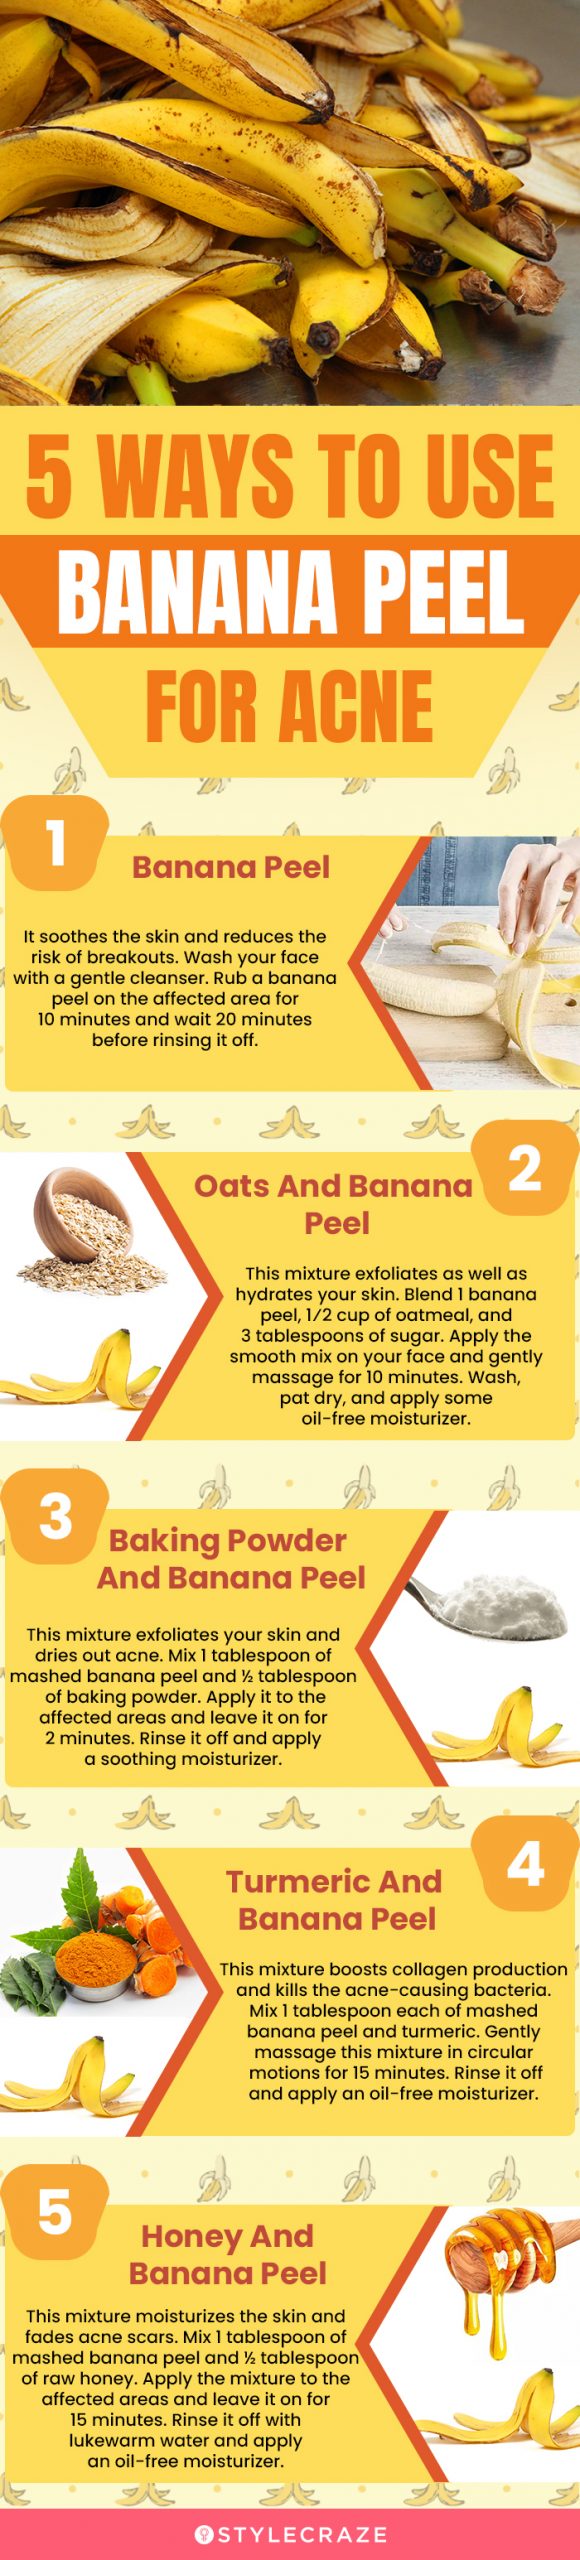 5 ways to use banana peel for acne (infographic)